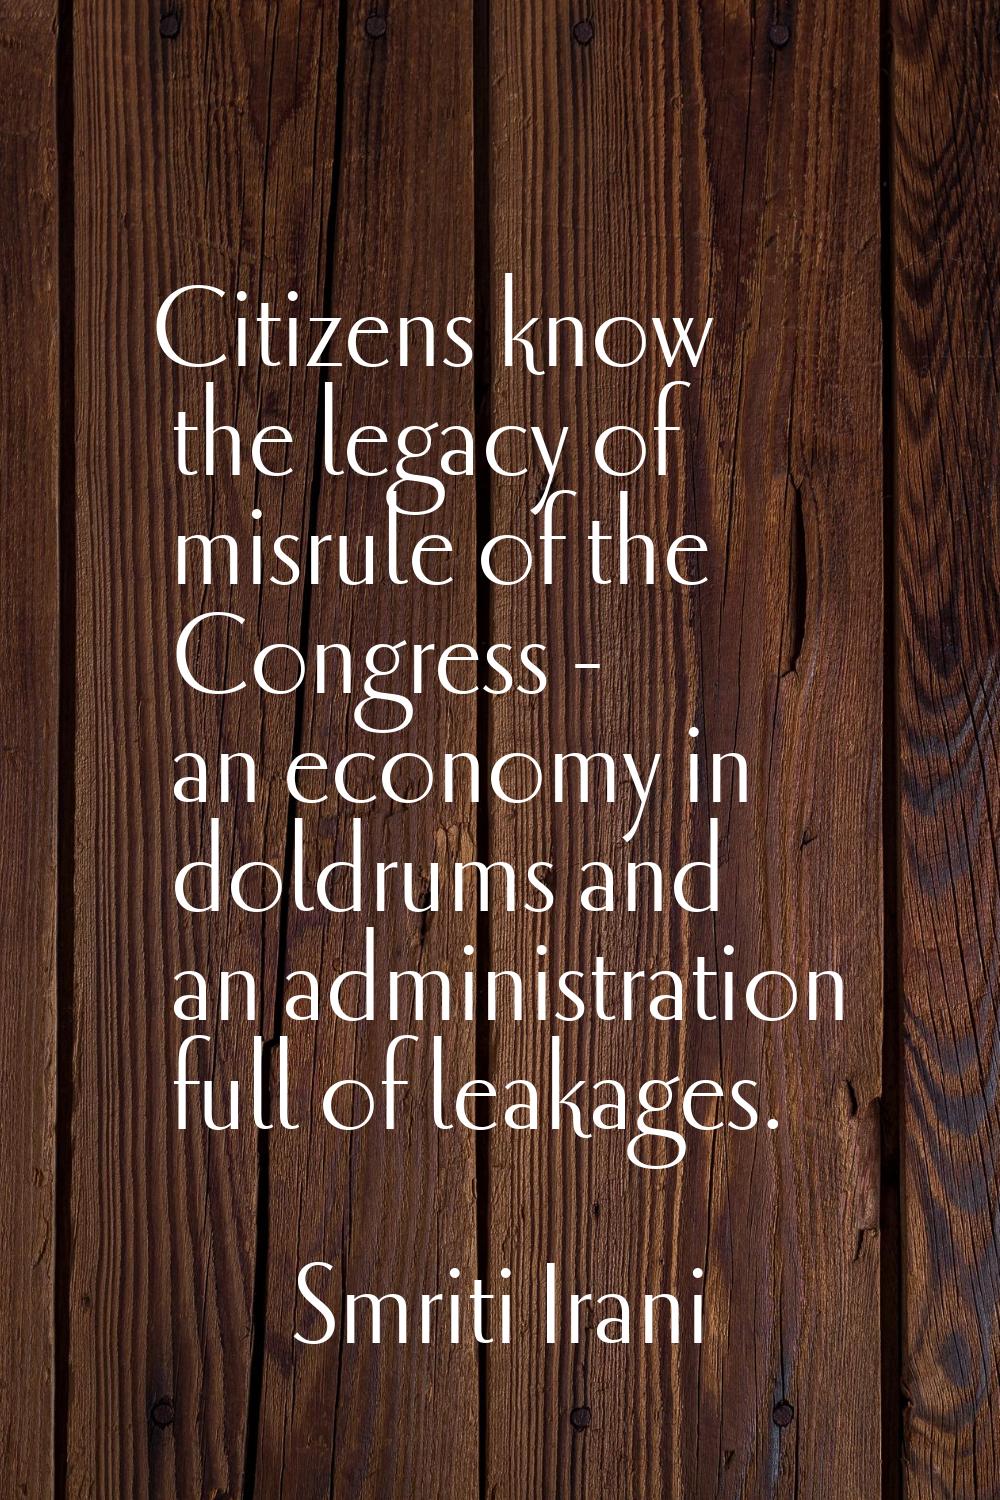 Citizens know the legacy of misrule of the Congress - an economy in doldrums and an administration 